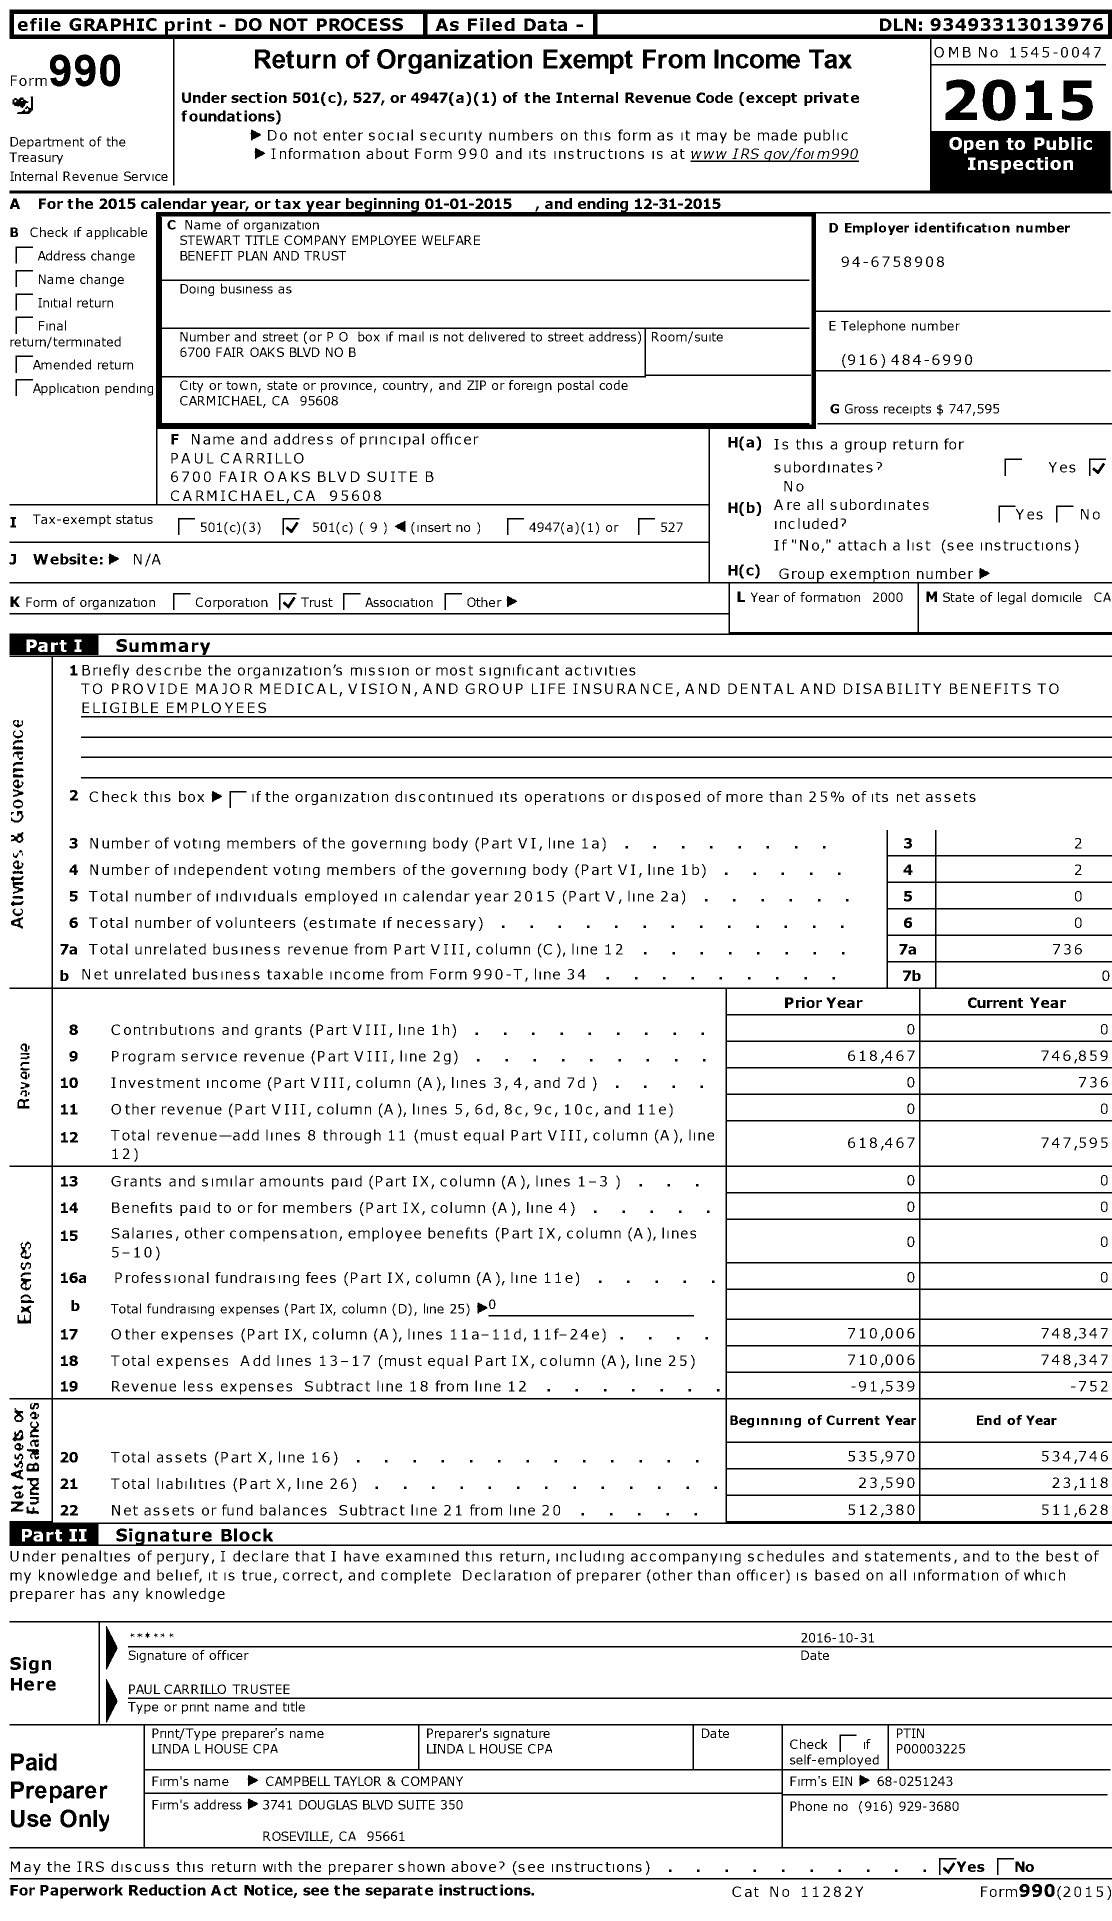 Image of first page of 2015 Form 990O for Stewart Title Company Employee Welfare Benefit Plan and Trust